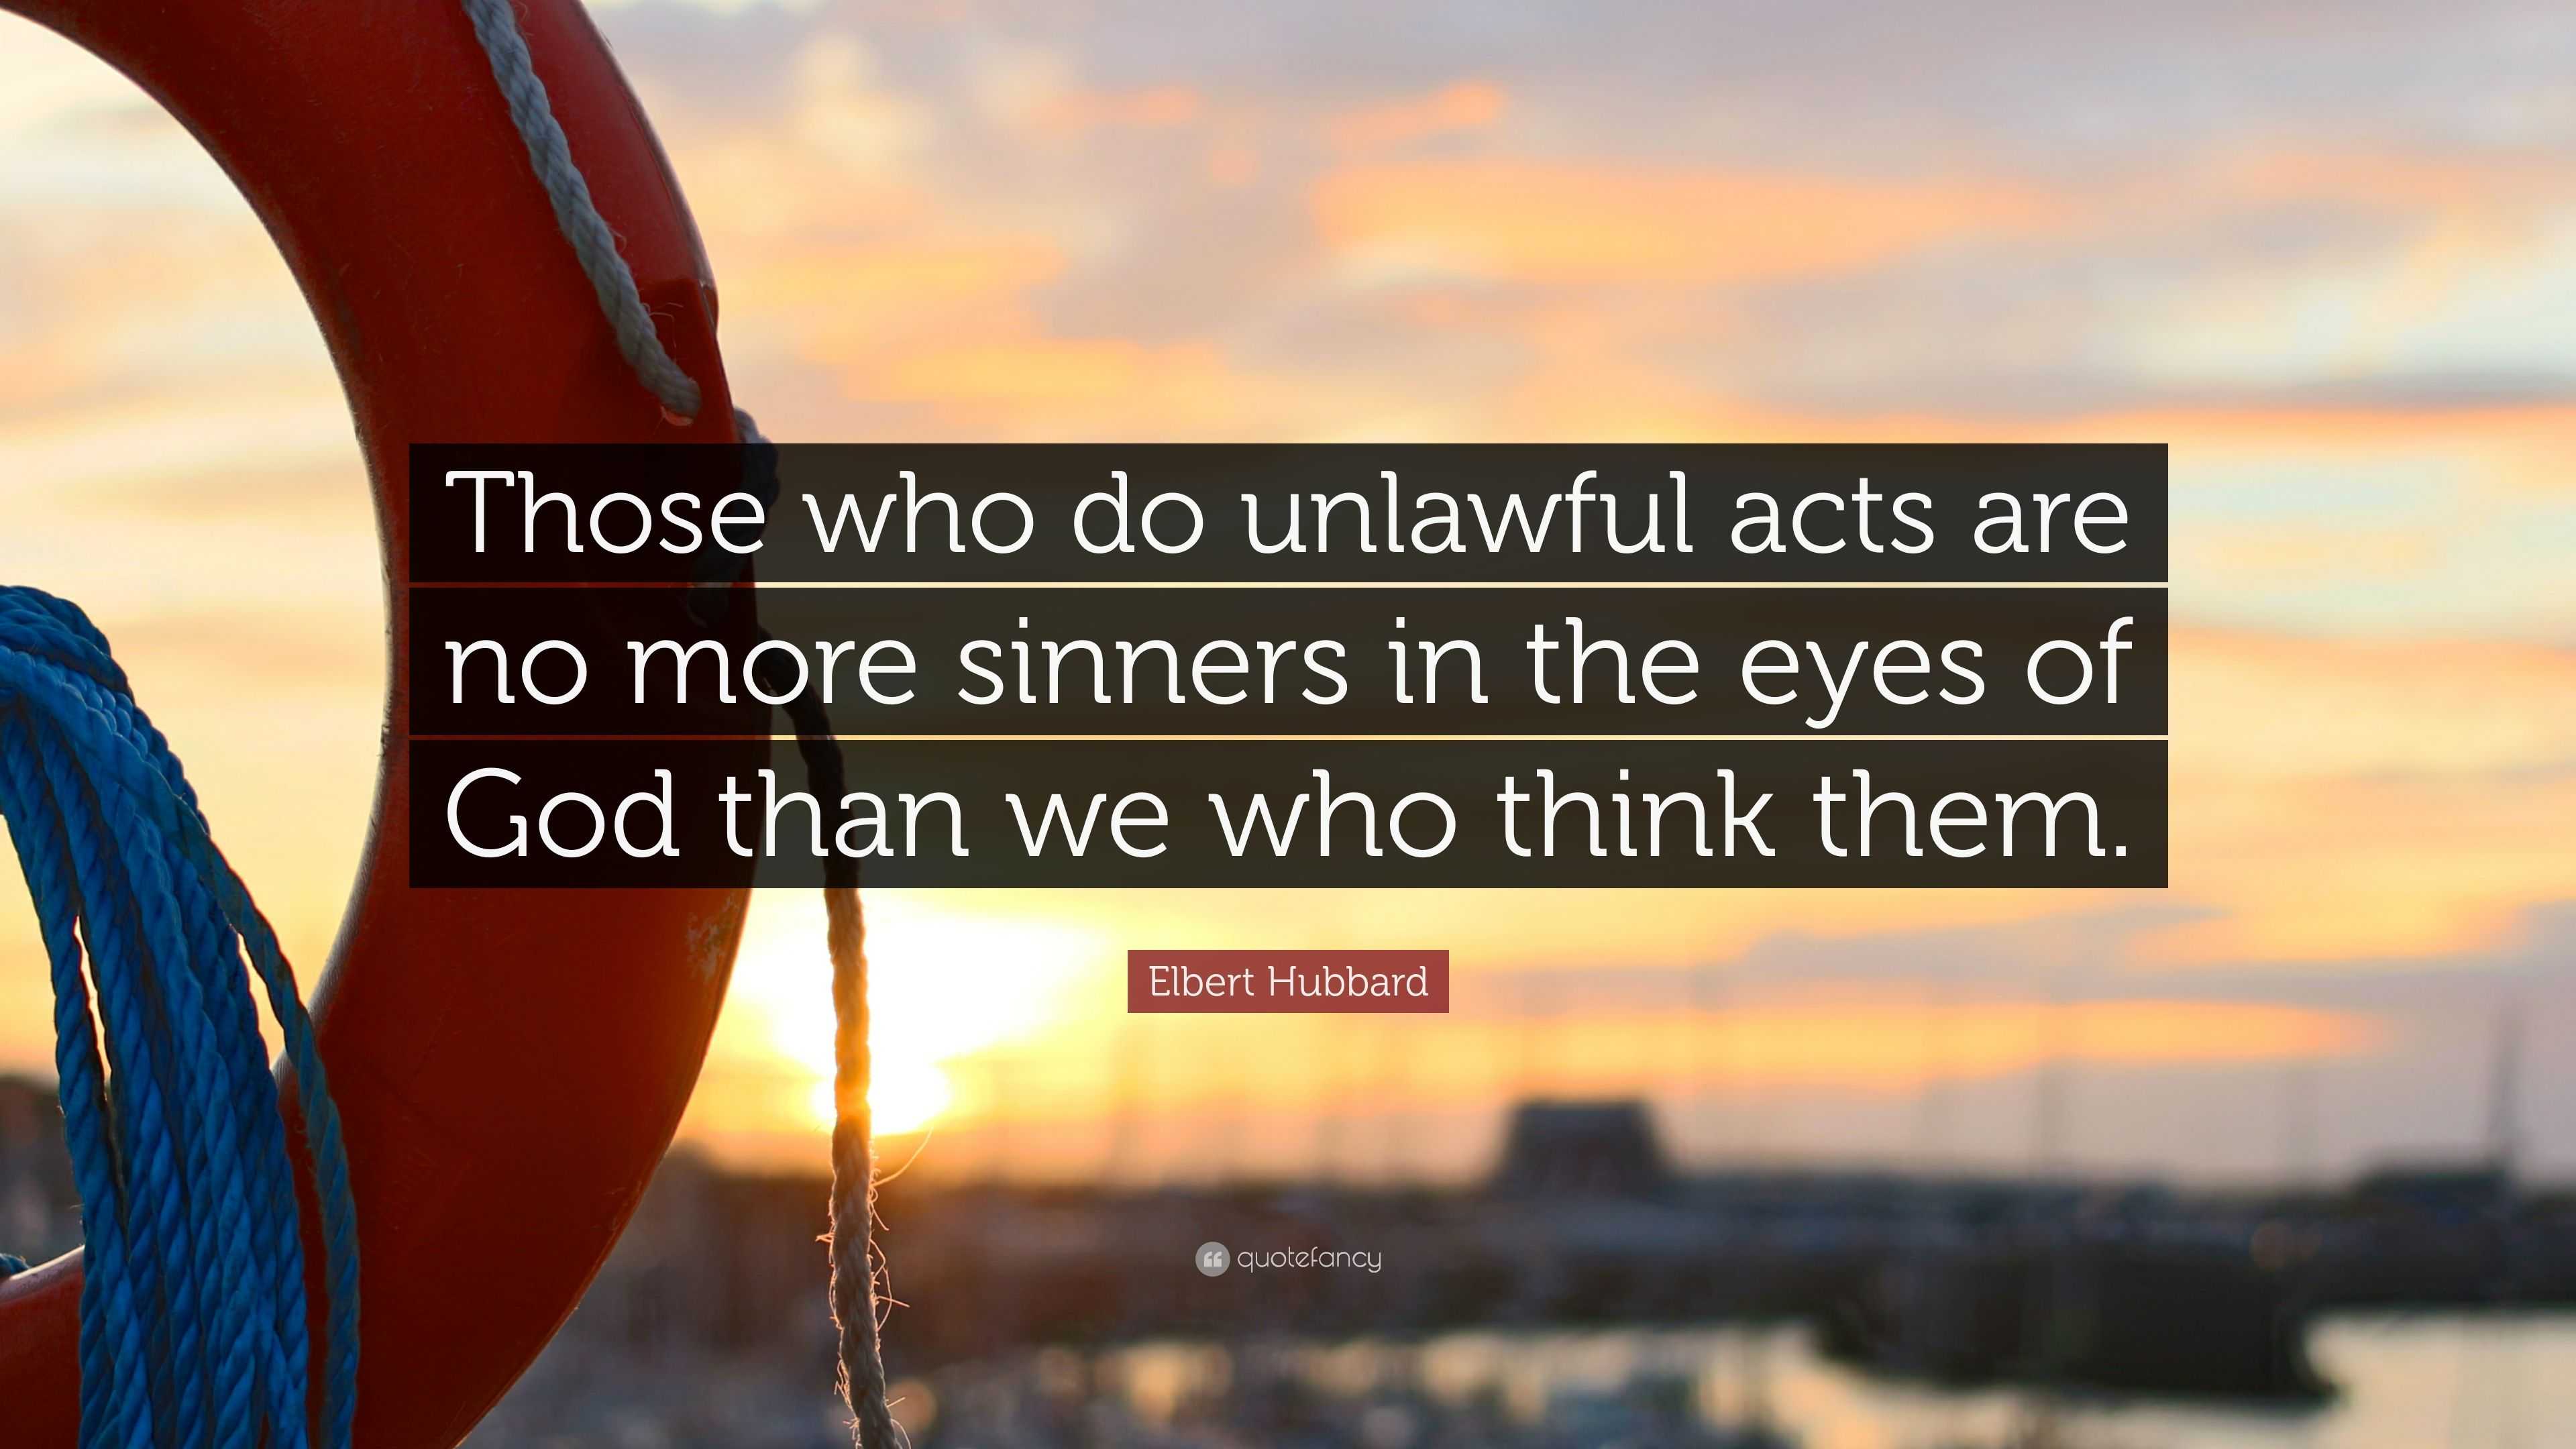 Elbert Hubbard Quote “Those who do unlawful acts are no more sinners in the